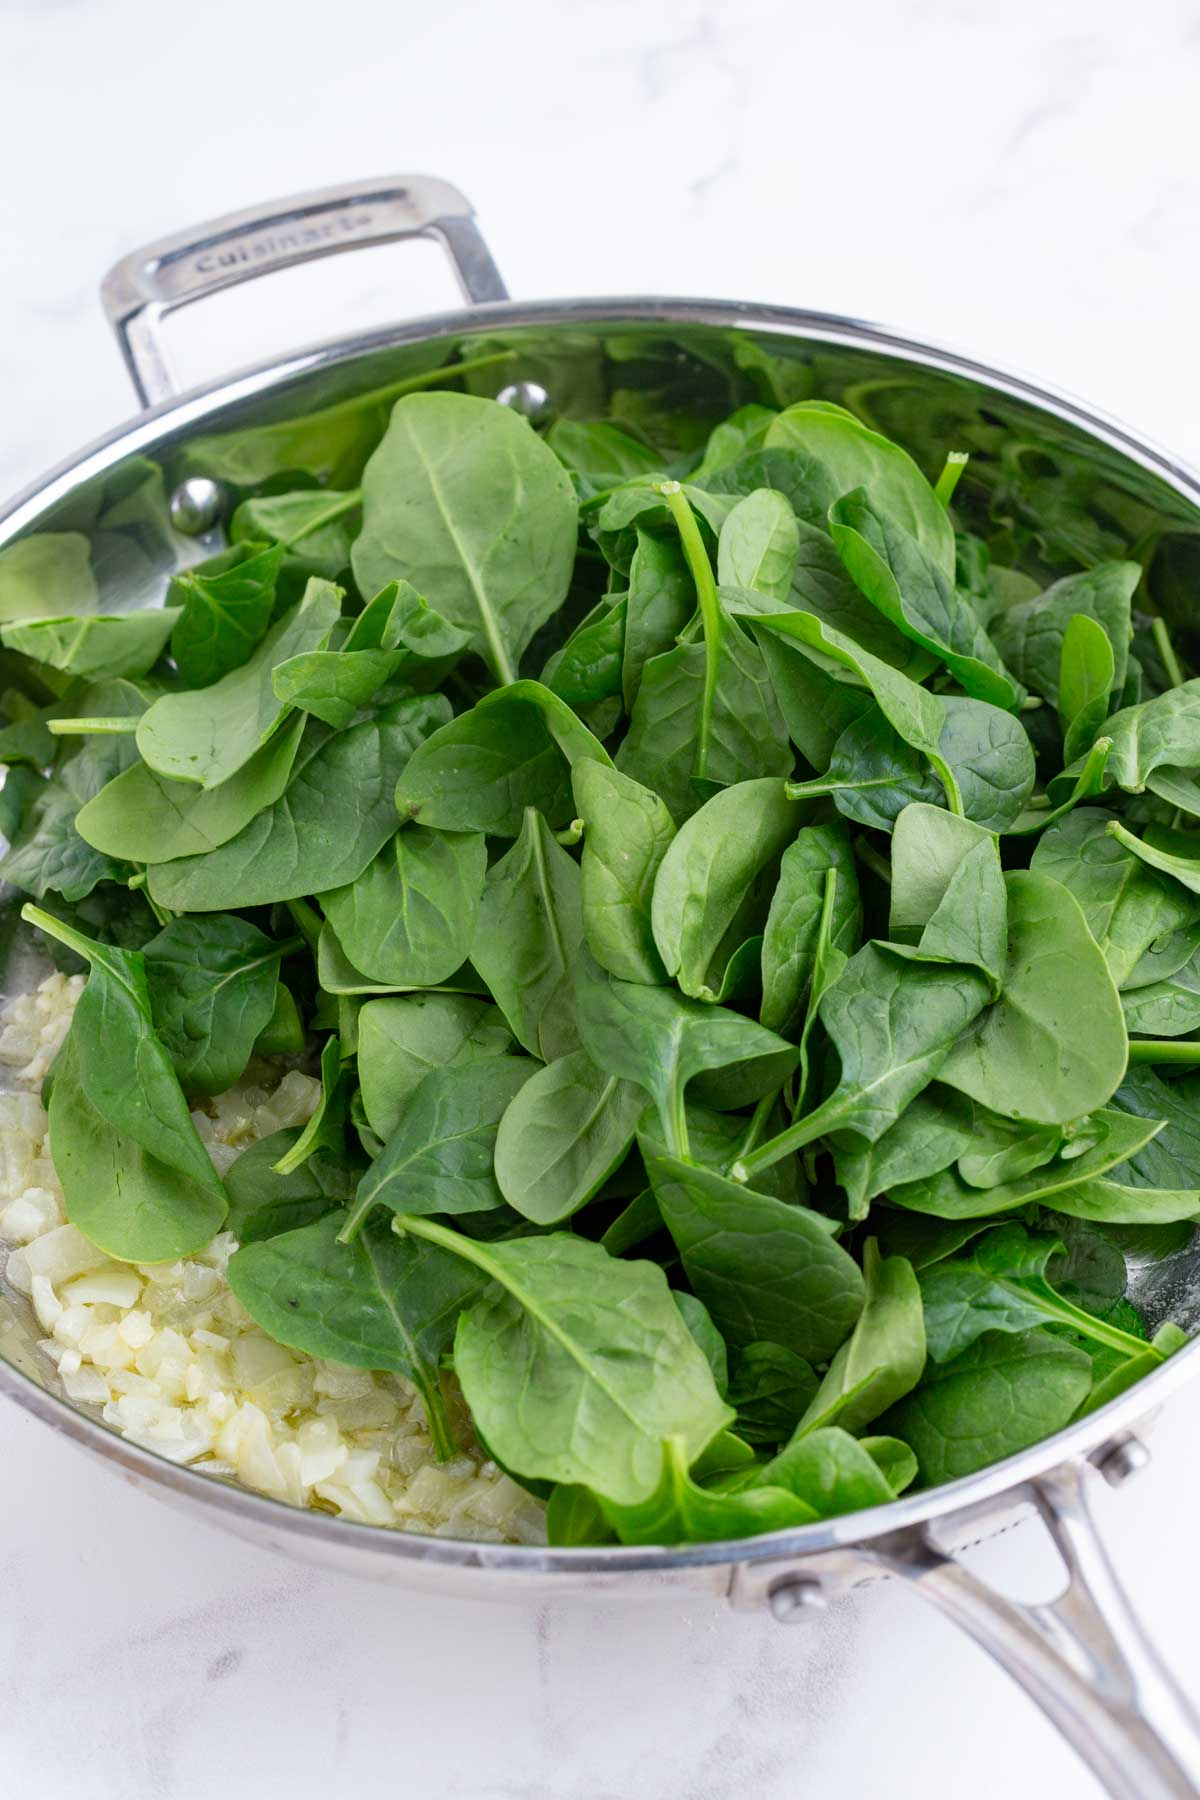 Spinach is added to the skillet.